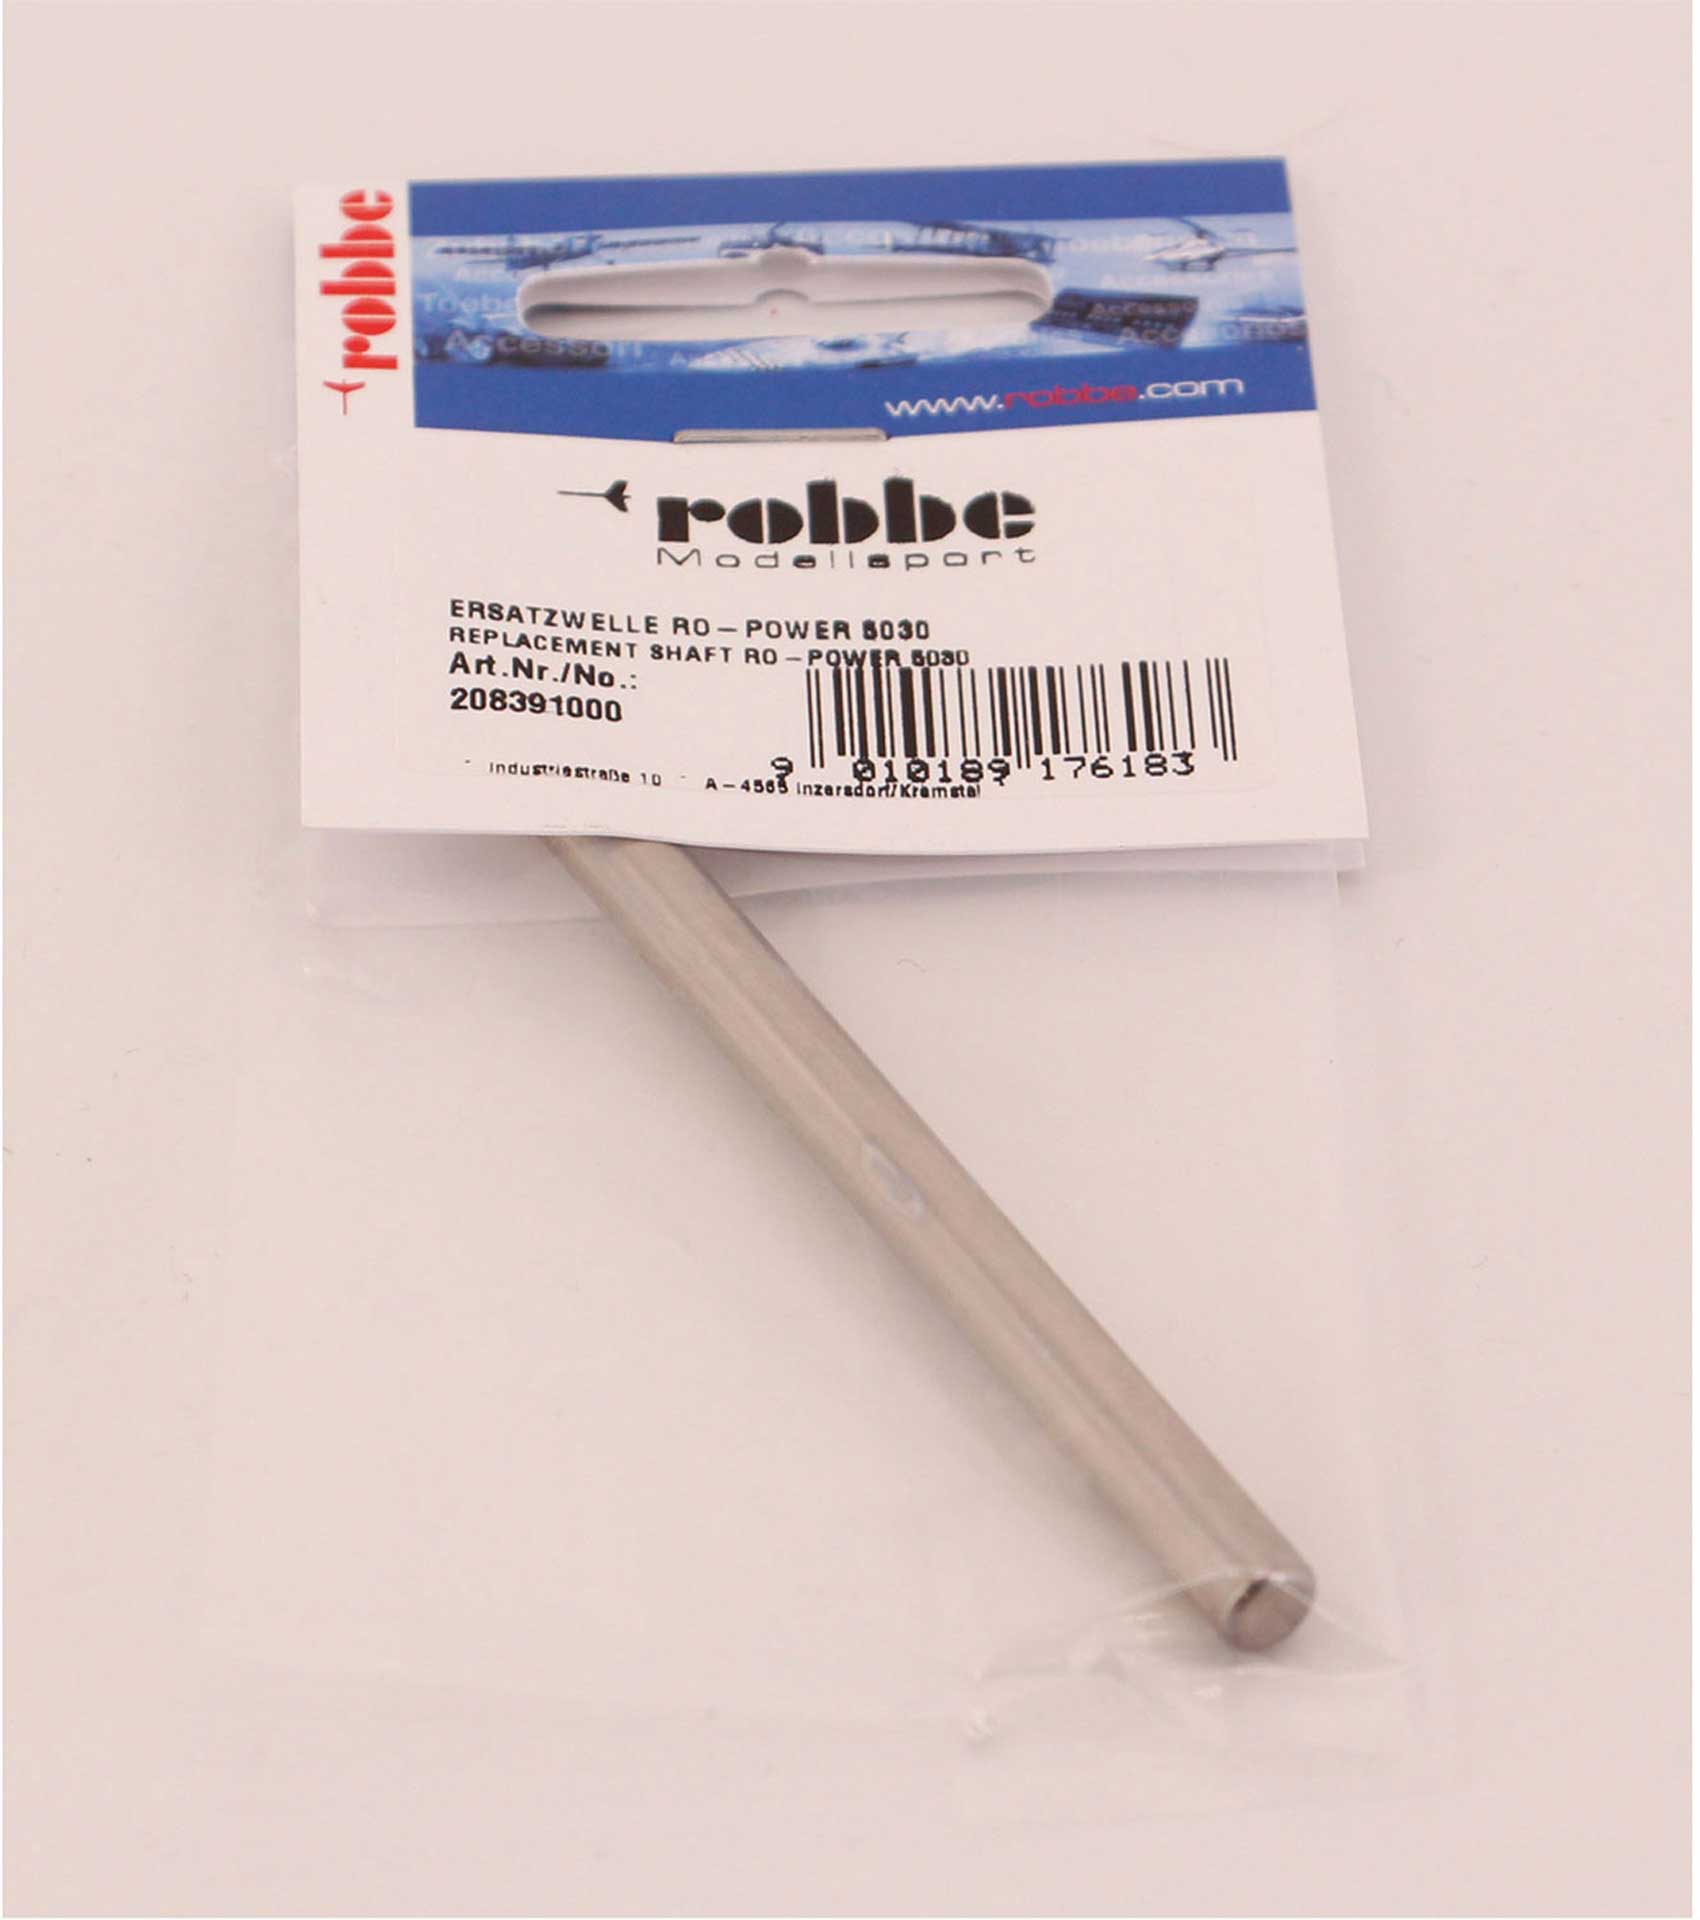 Robbe Modellsport REPLACEMENT SHAFT RO-POWER 5030